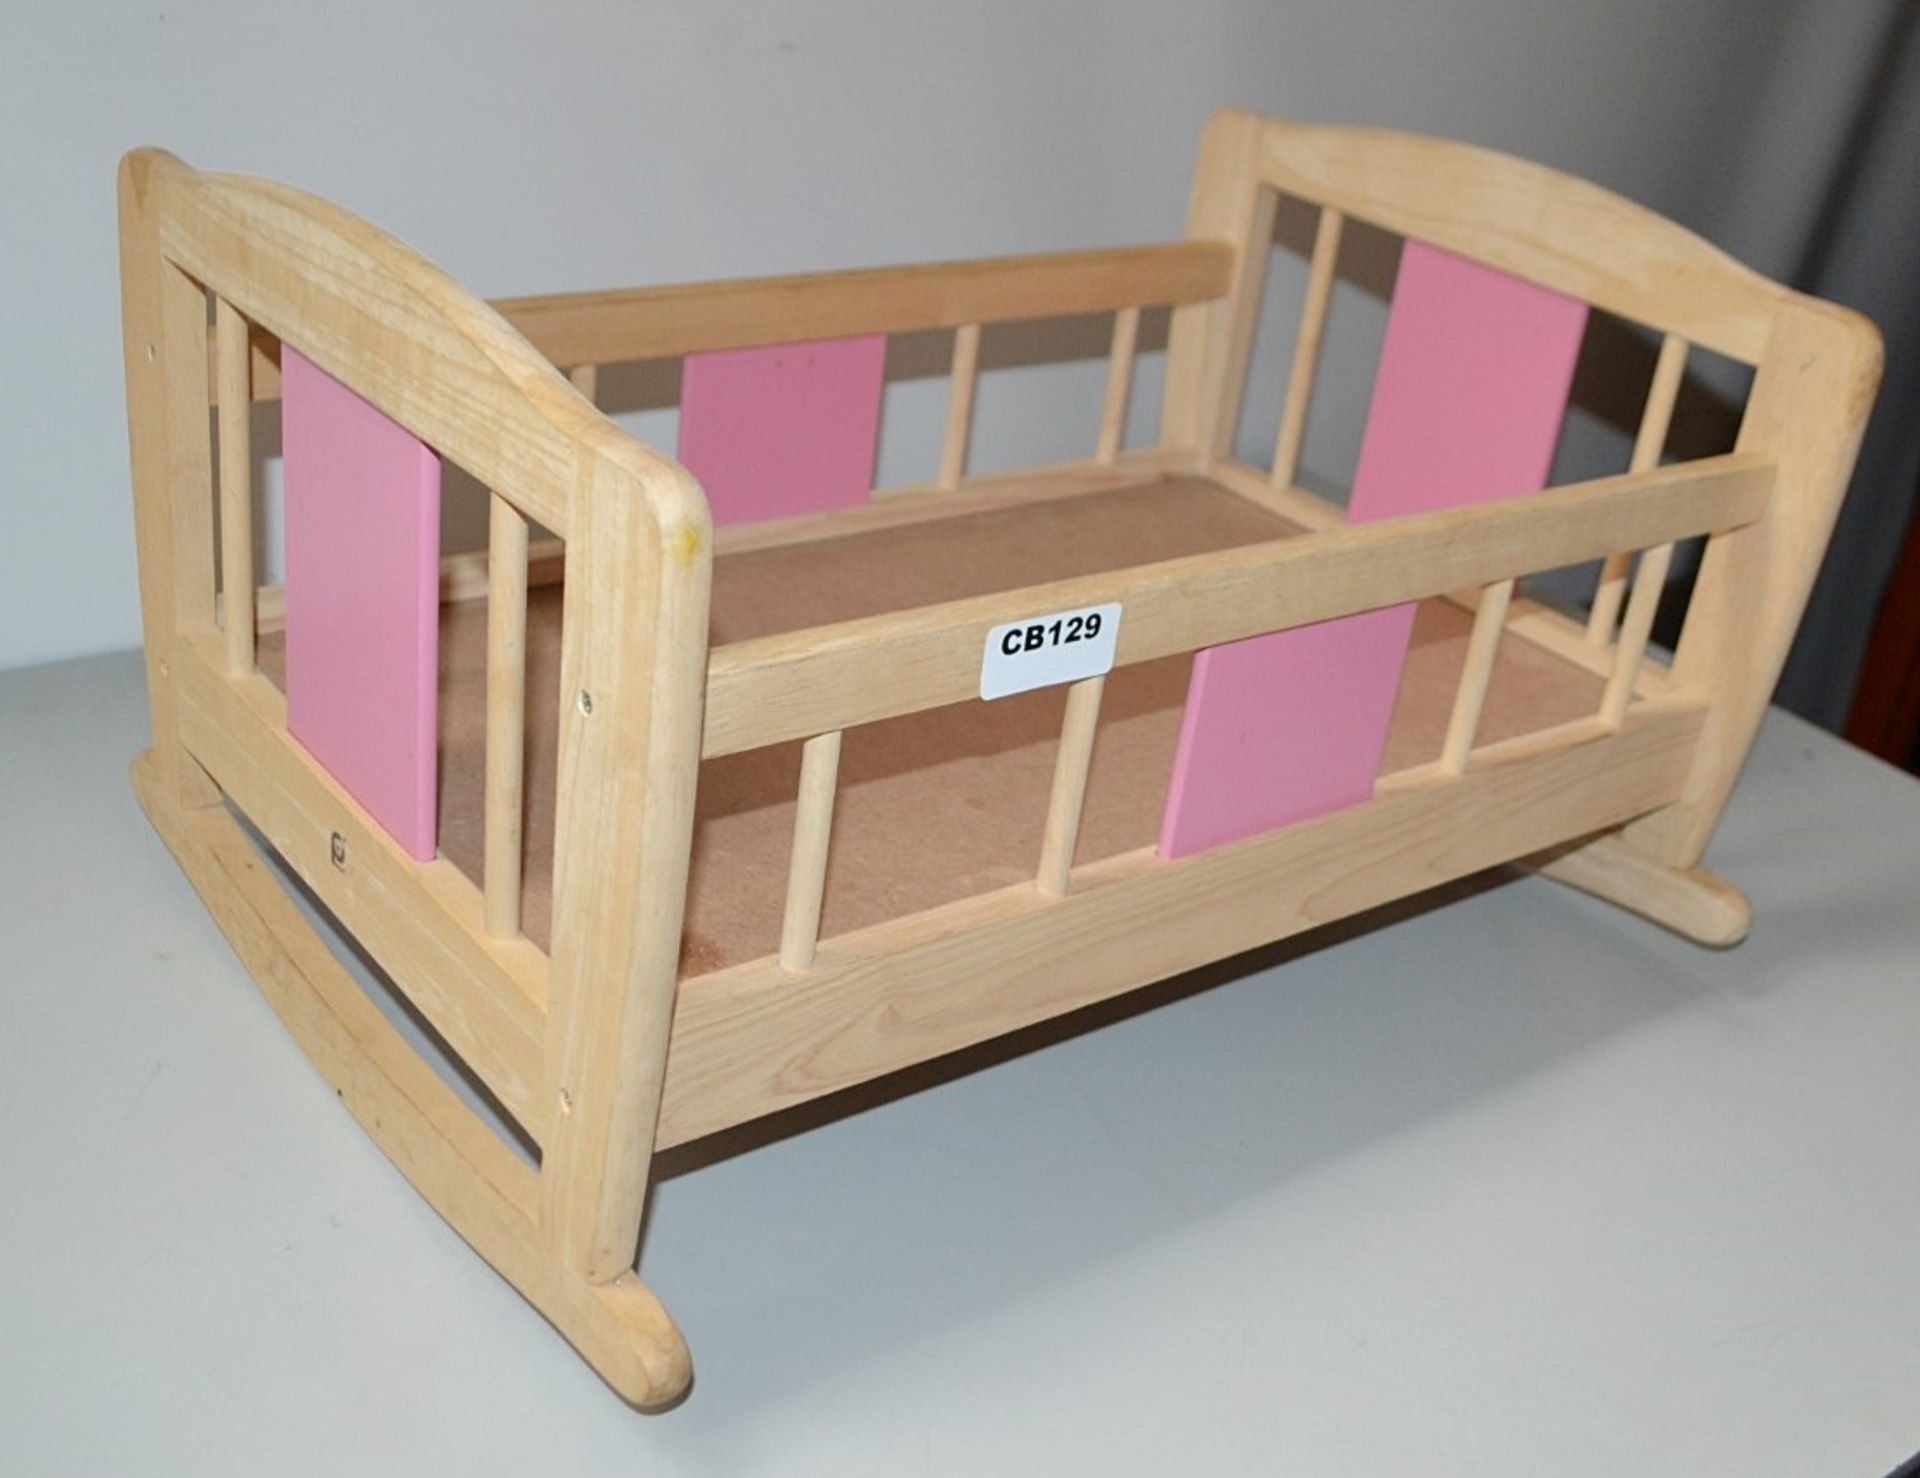 1 x Toy Wooden Doll Cot - Ref: CB129 - CL425 - Location: Altrincham WA14 - Image 2 of 4